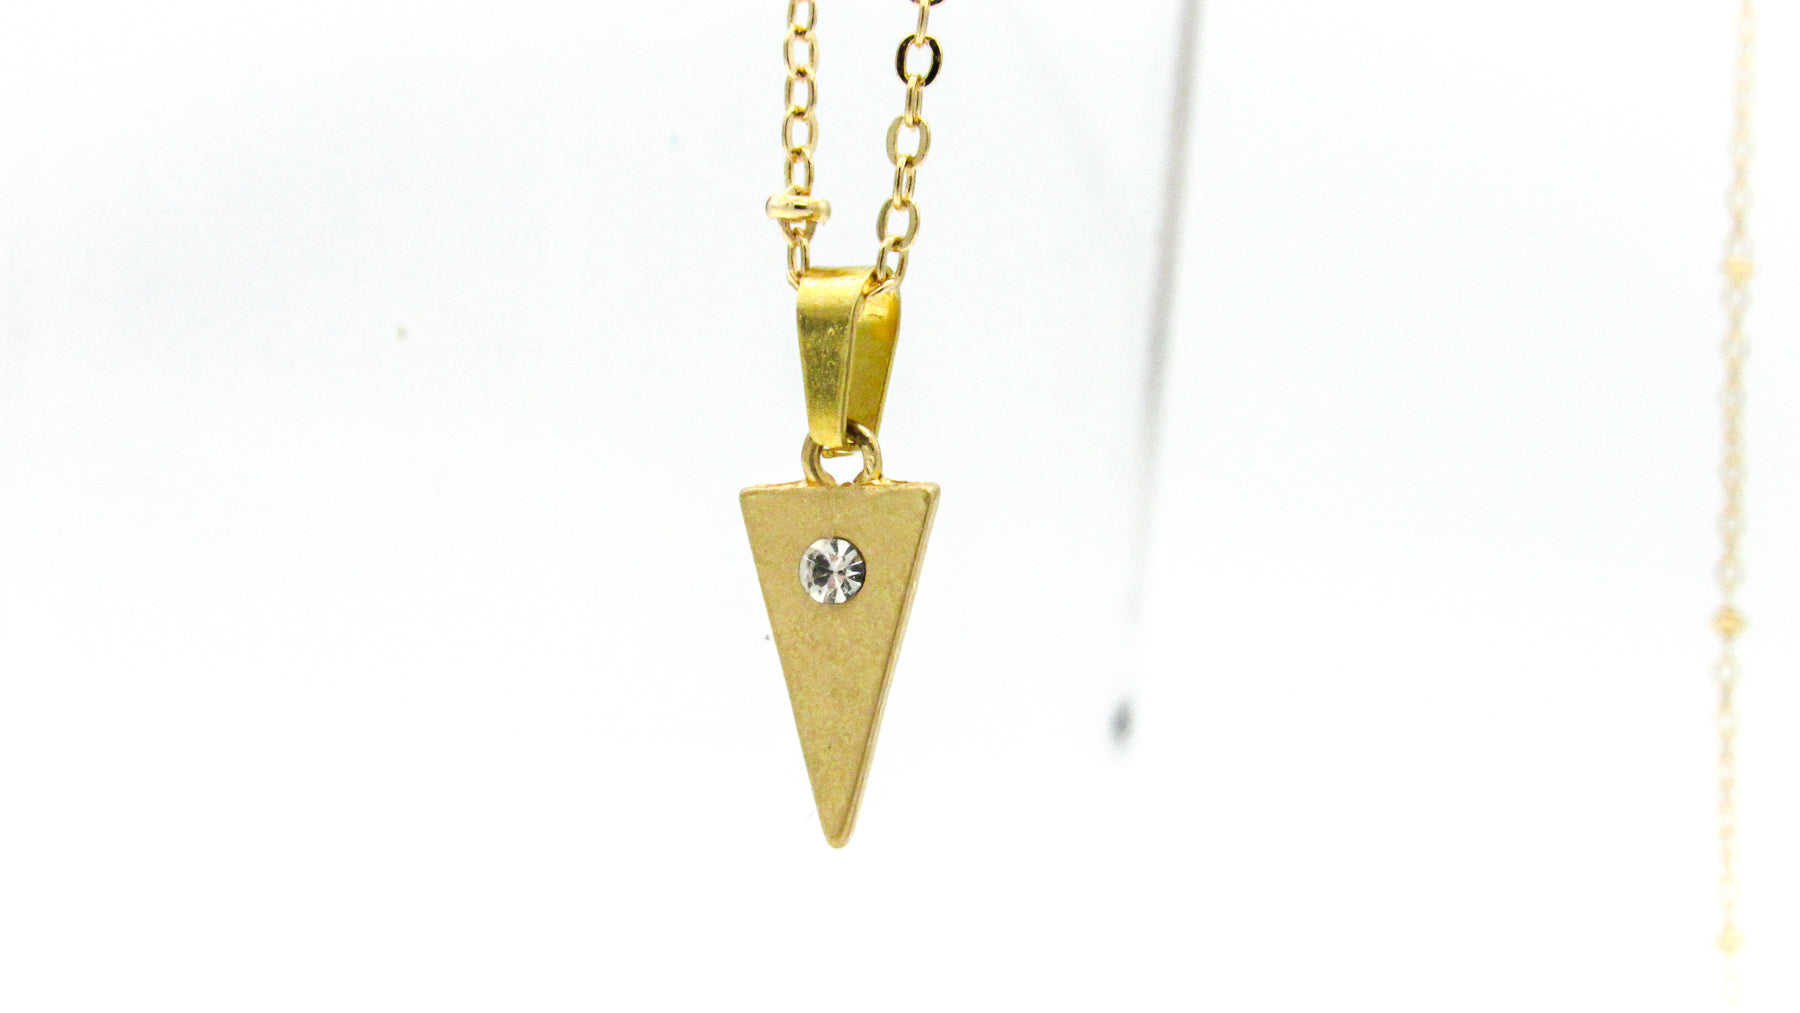 Dainty Triangle Gold Pendant Necklace With CZ Pave •  Necklaces • Oh, Heart!